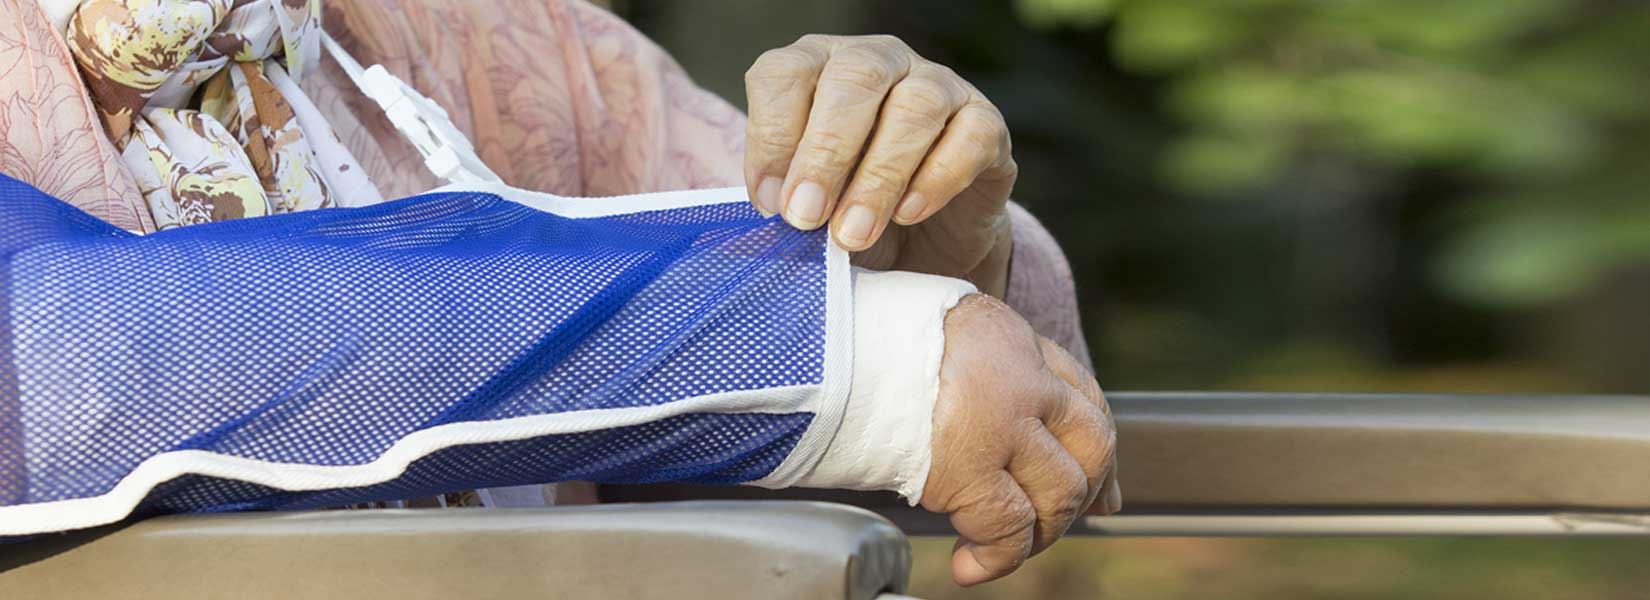 An elderly woman with a cast on her arm